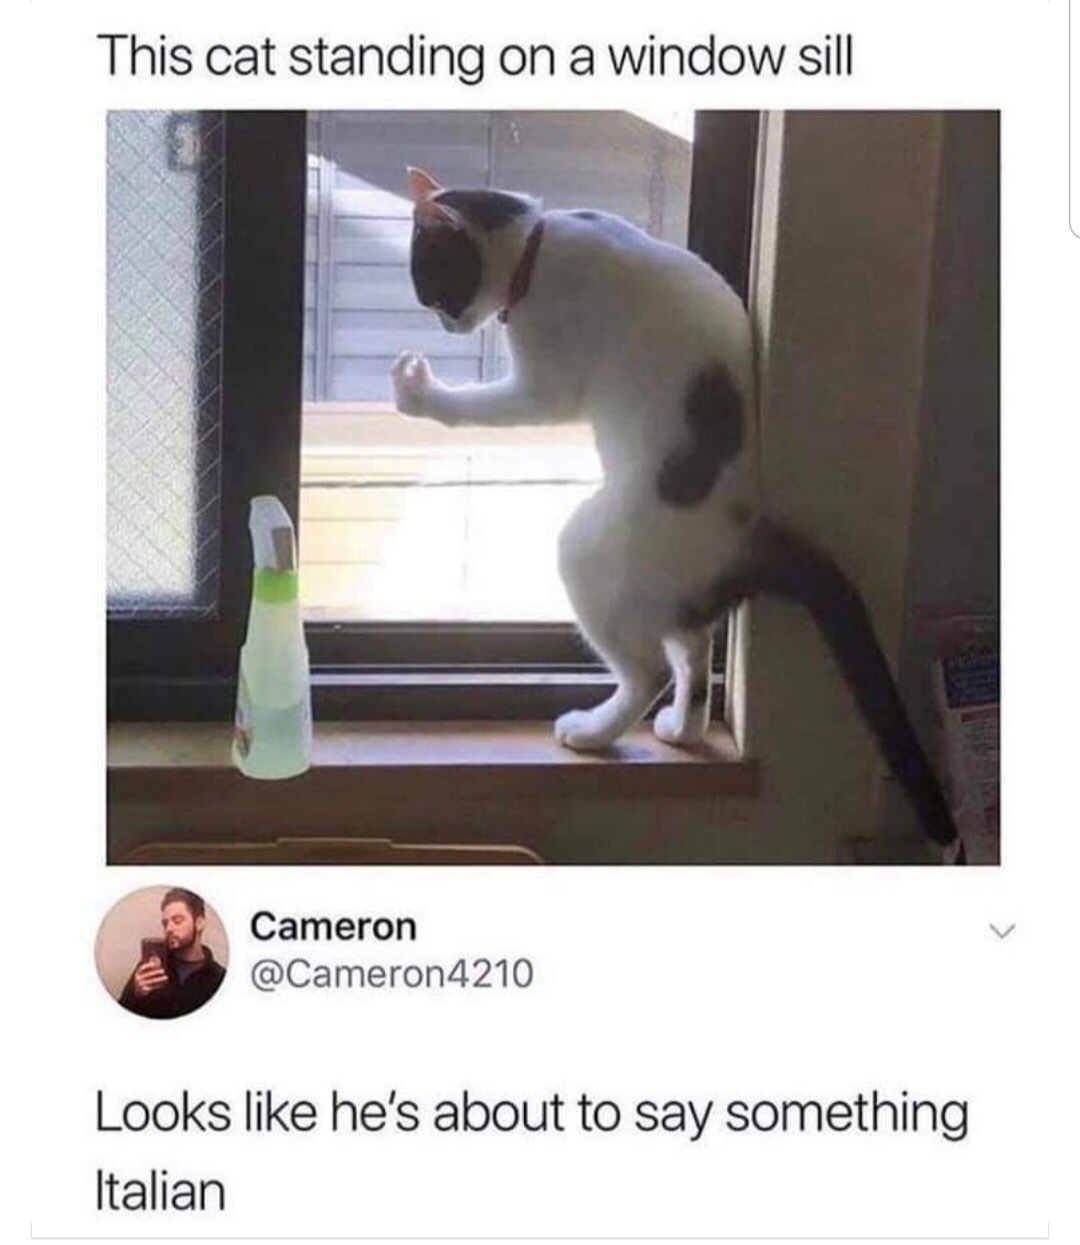 Meme - This cat standing on a window sill Cameron 4210 Looks he's about to say something Italian